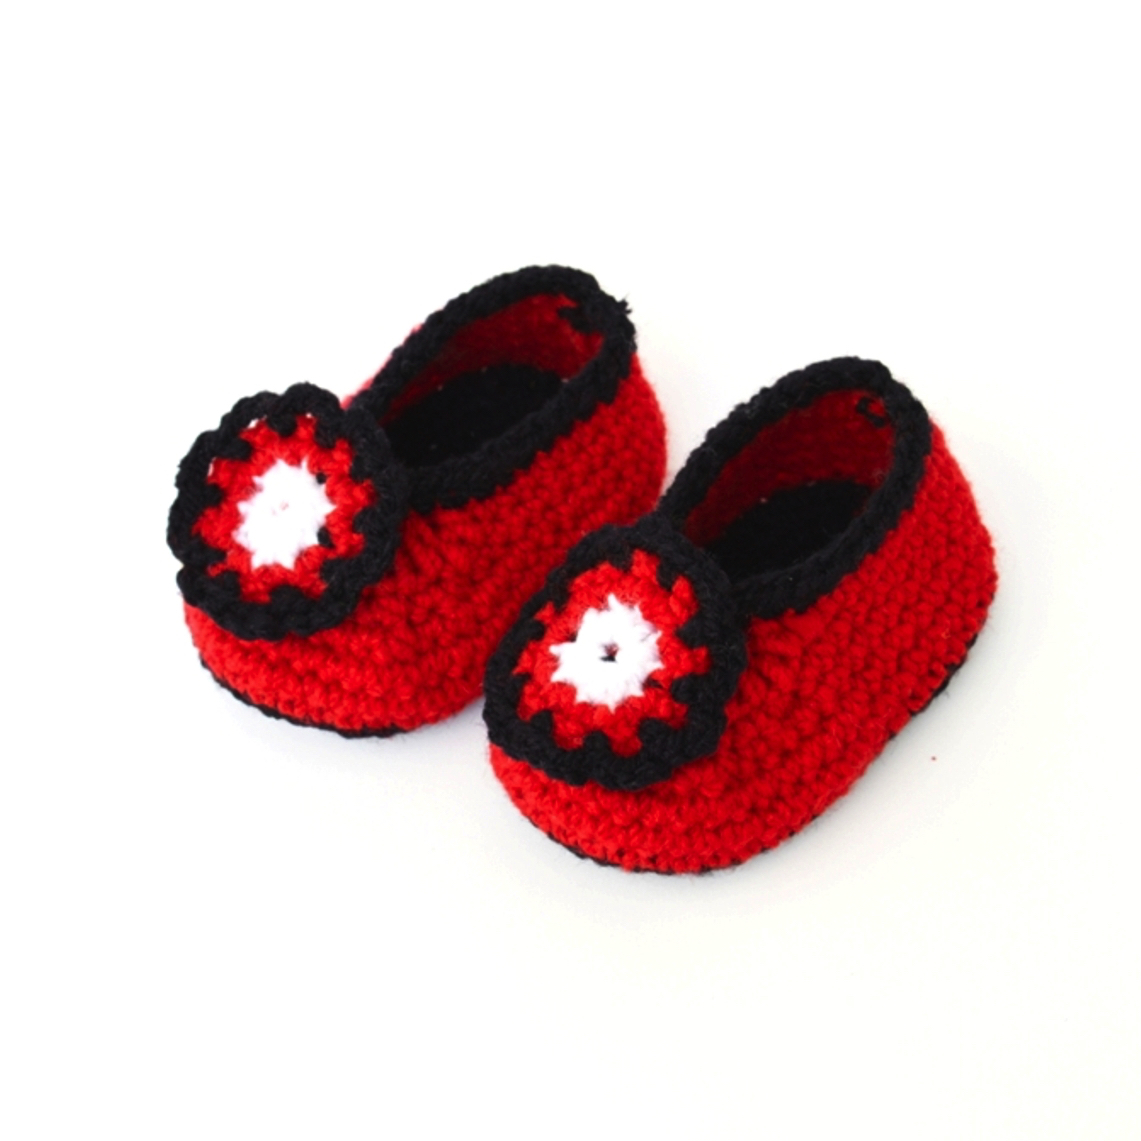 Crochet Baby Booties - Red With Black Border